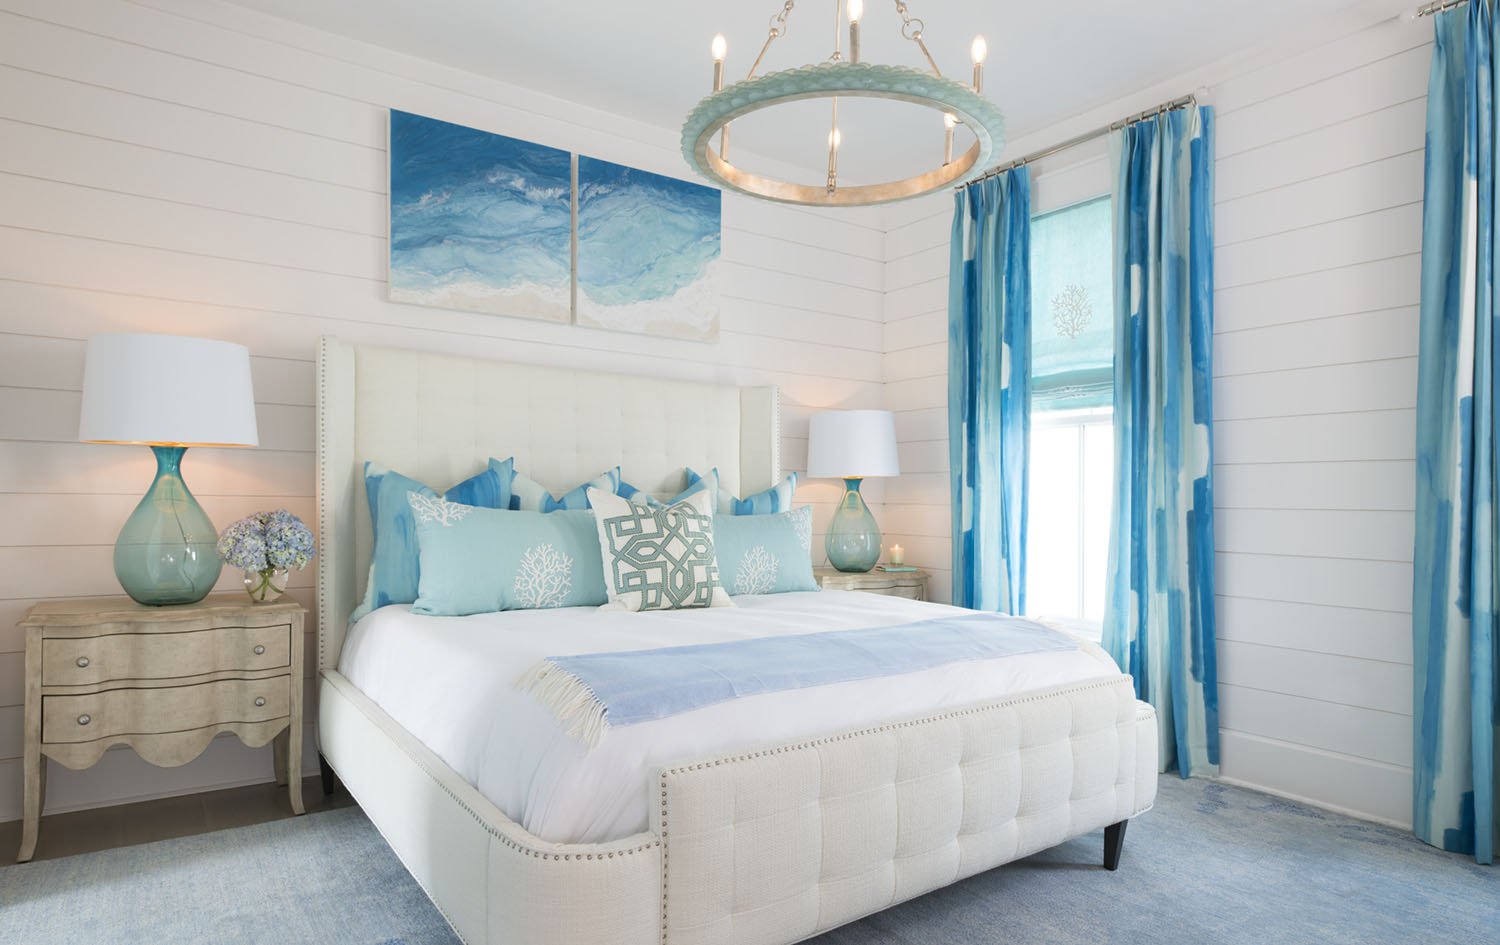 Shay Geyer bedroom with white walls and fabrics in aqua tones